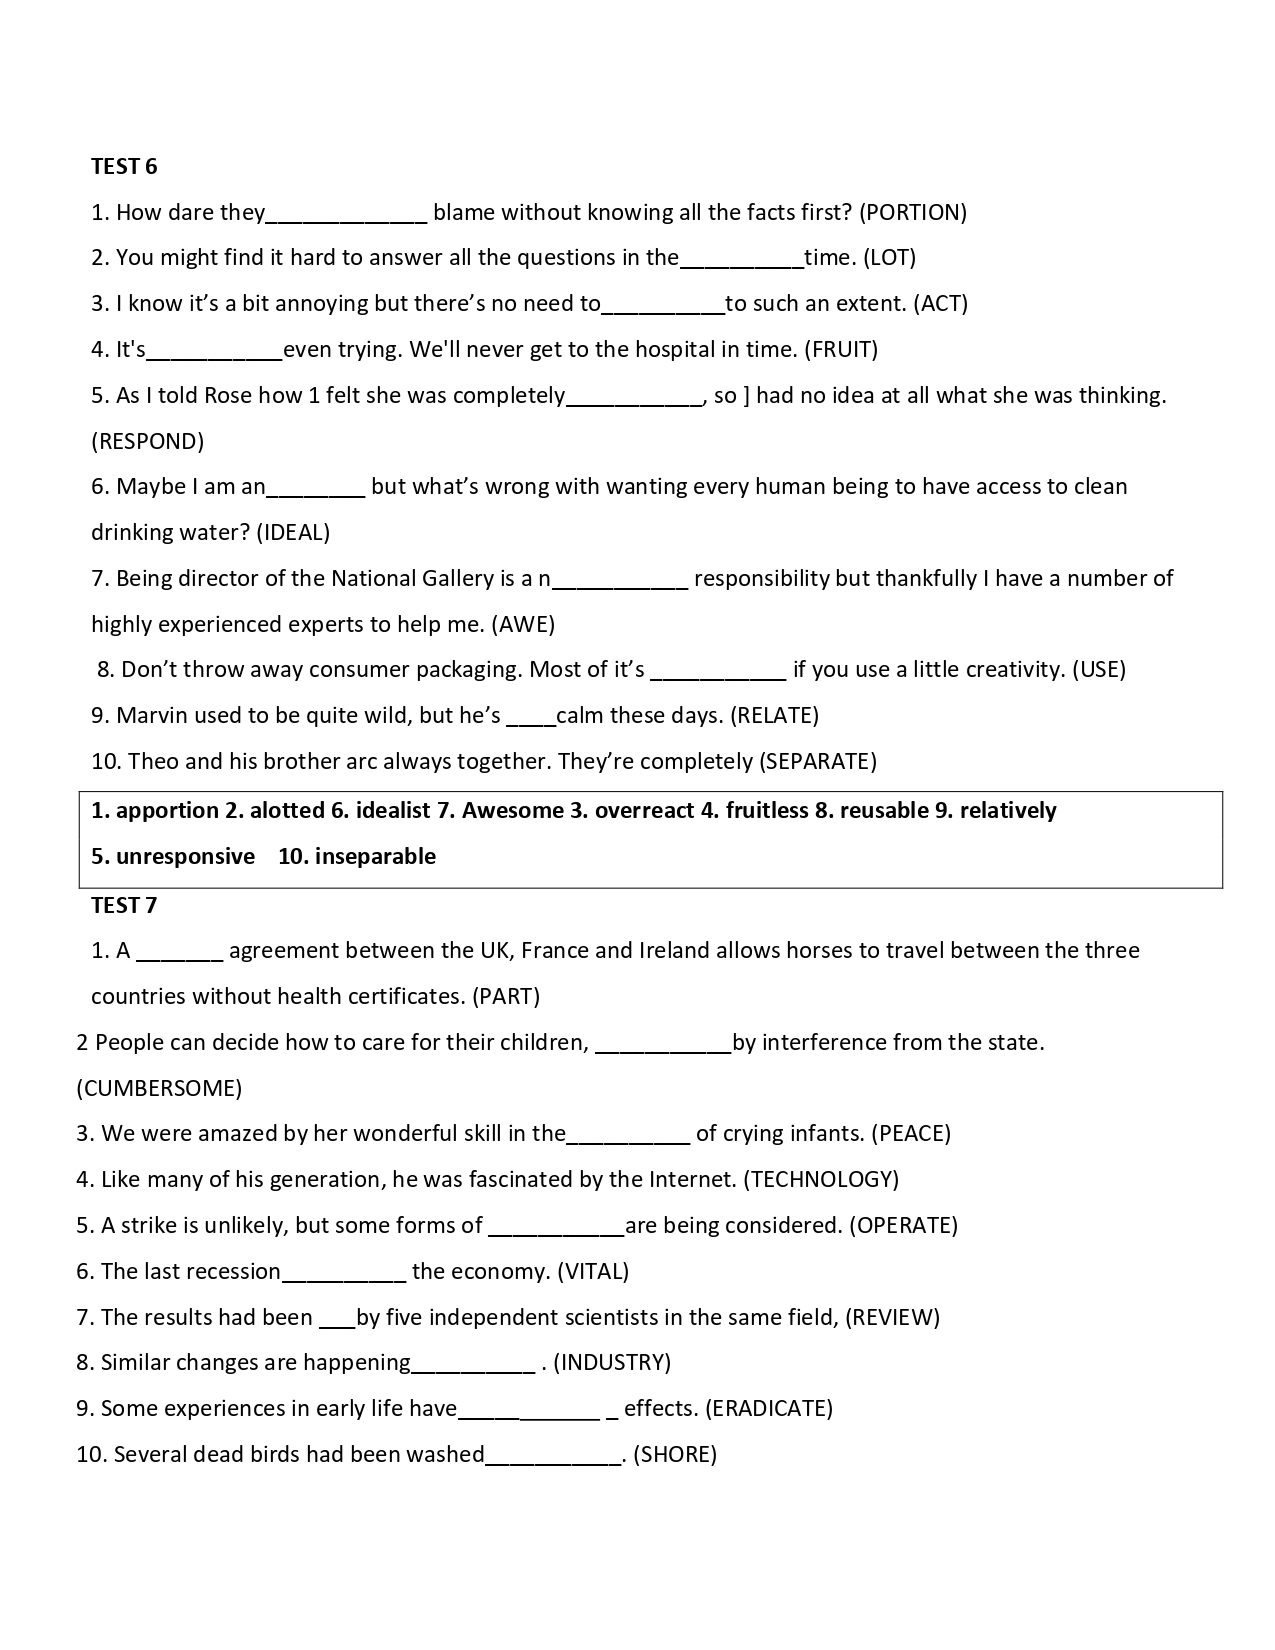 [tailieudieuky.com] 65 pages of word form for gifted students_page-0002